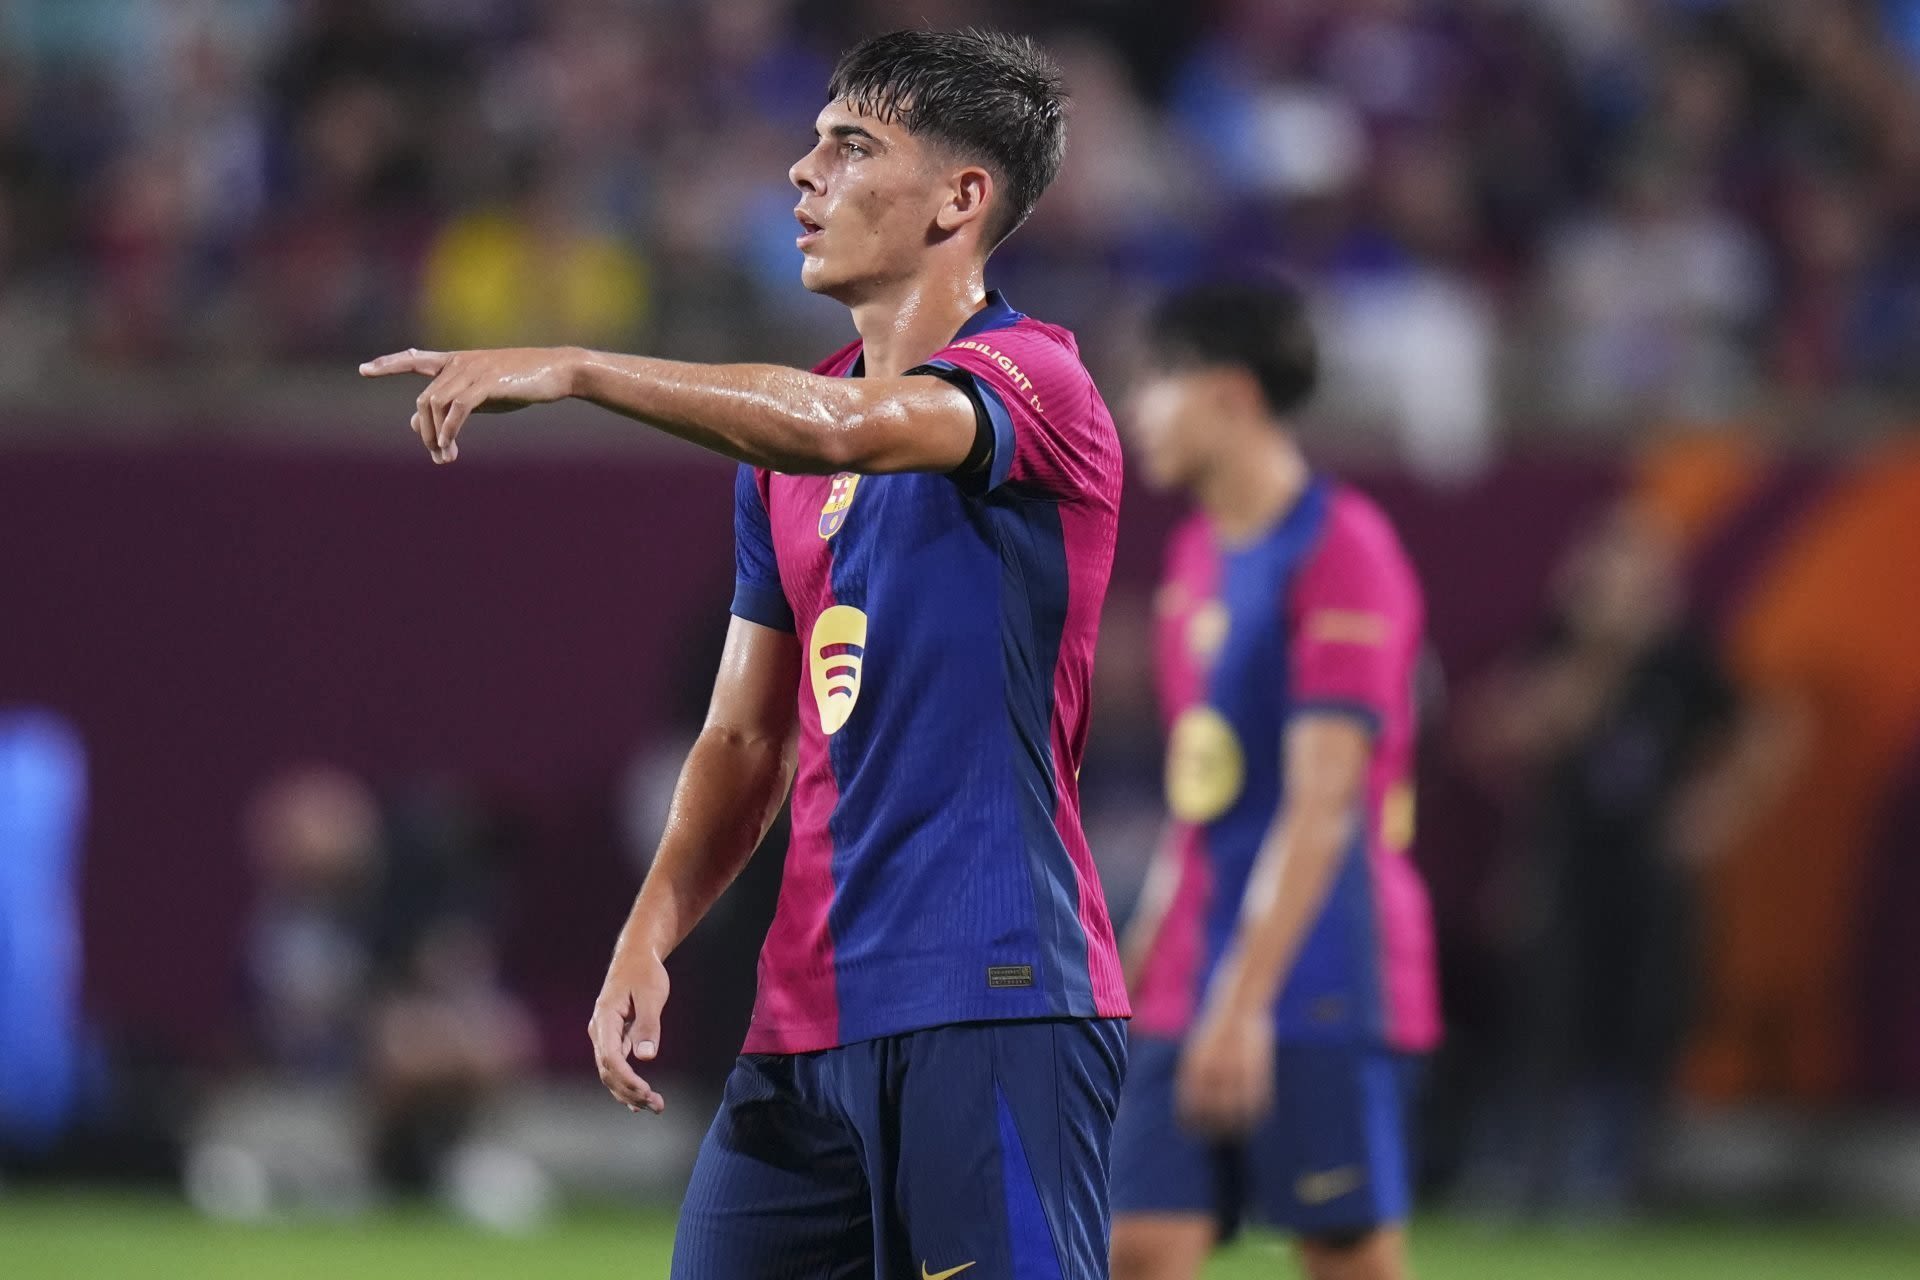 20-year-old Barcelona defender speaks about his future after starring vs Real Madrid: “I don’t think it’s up to me”